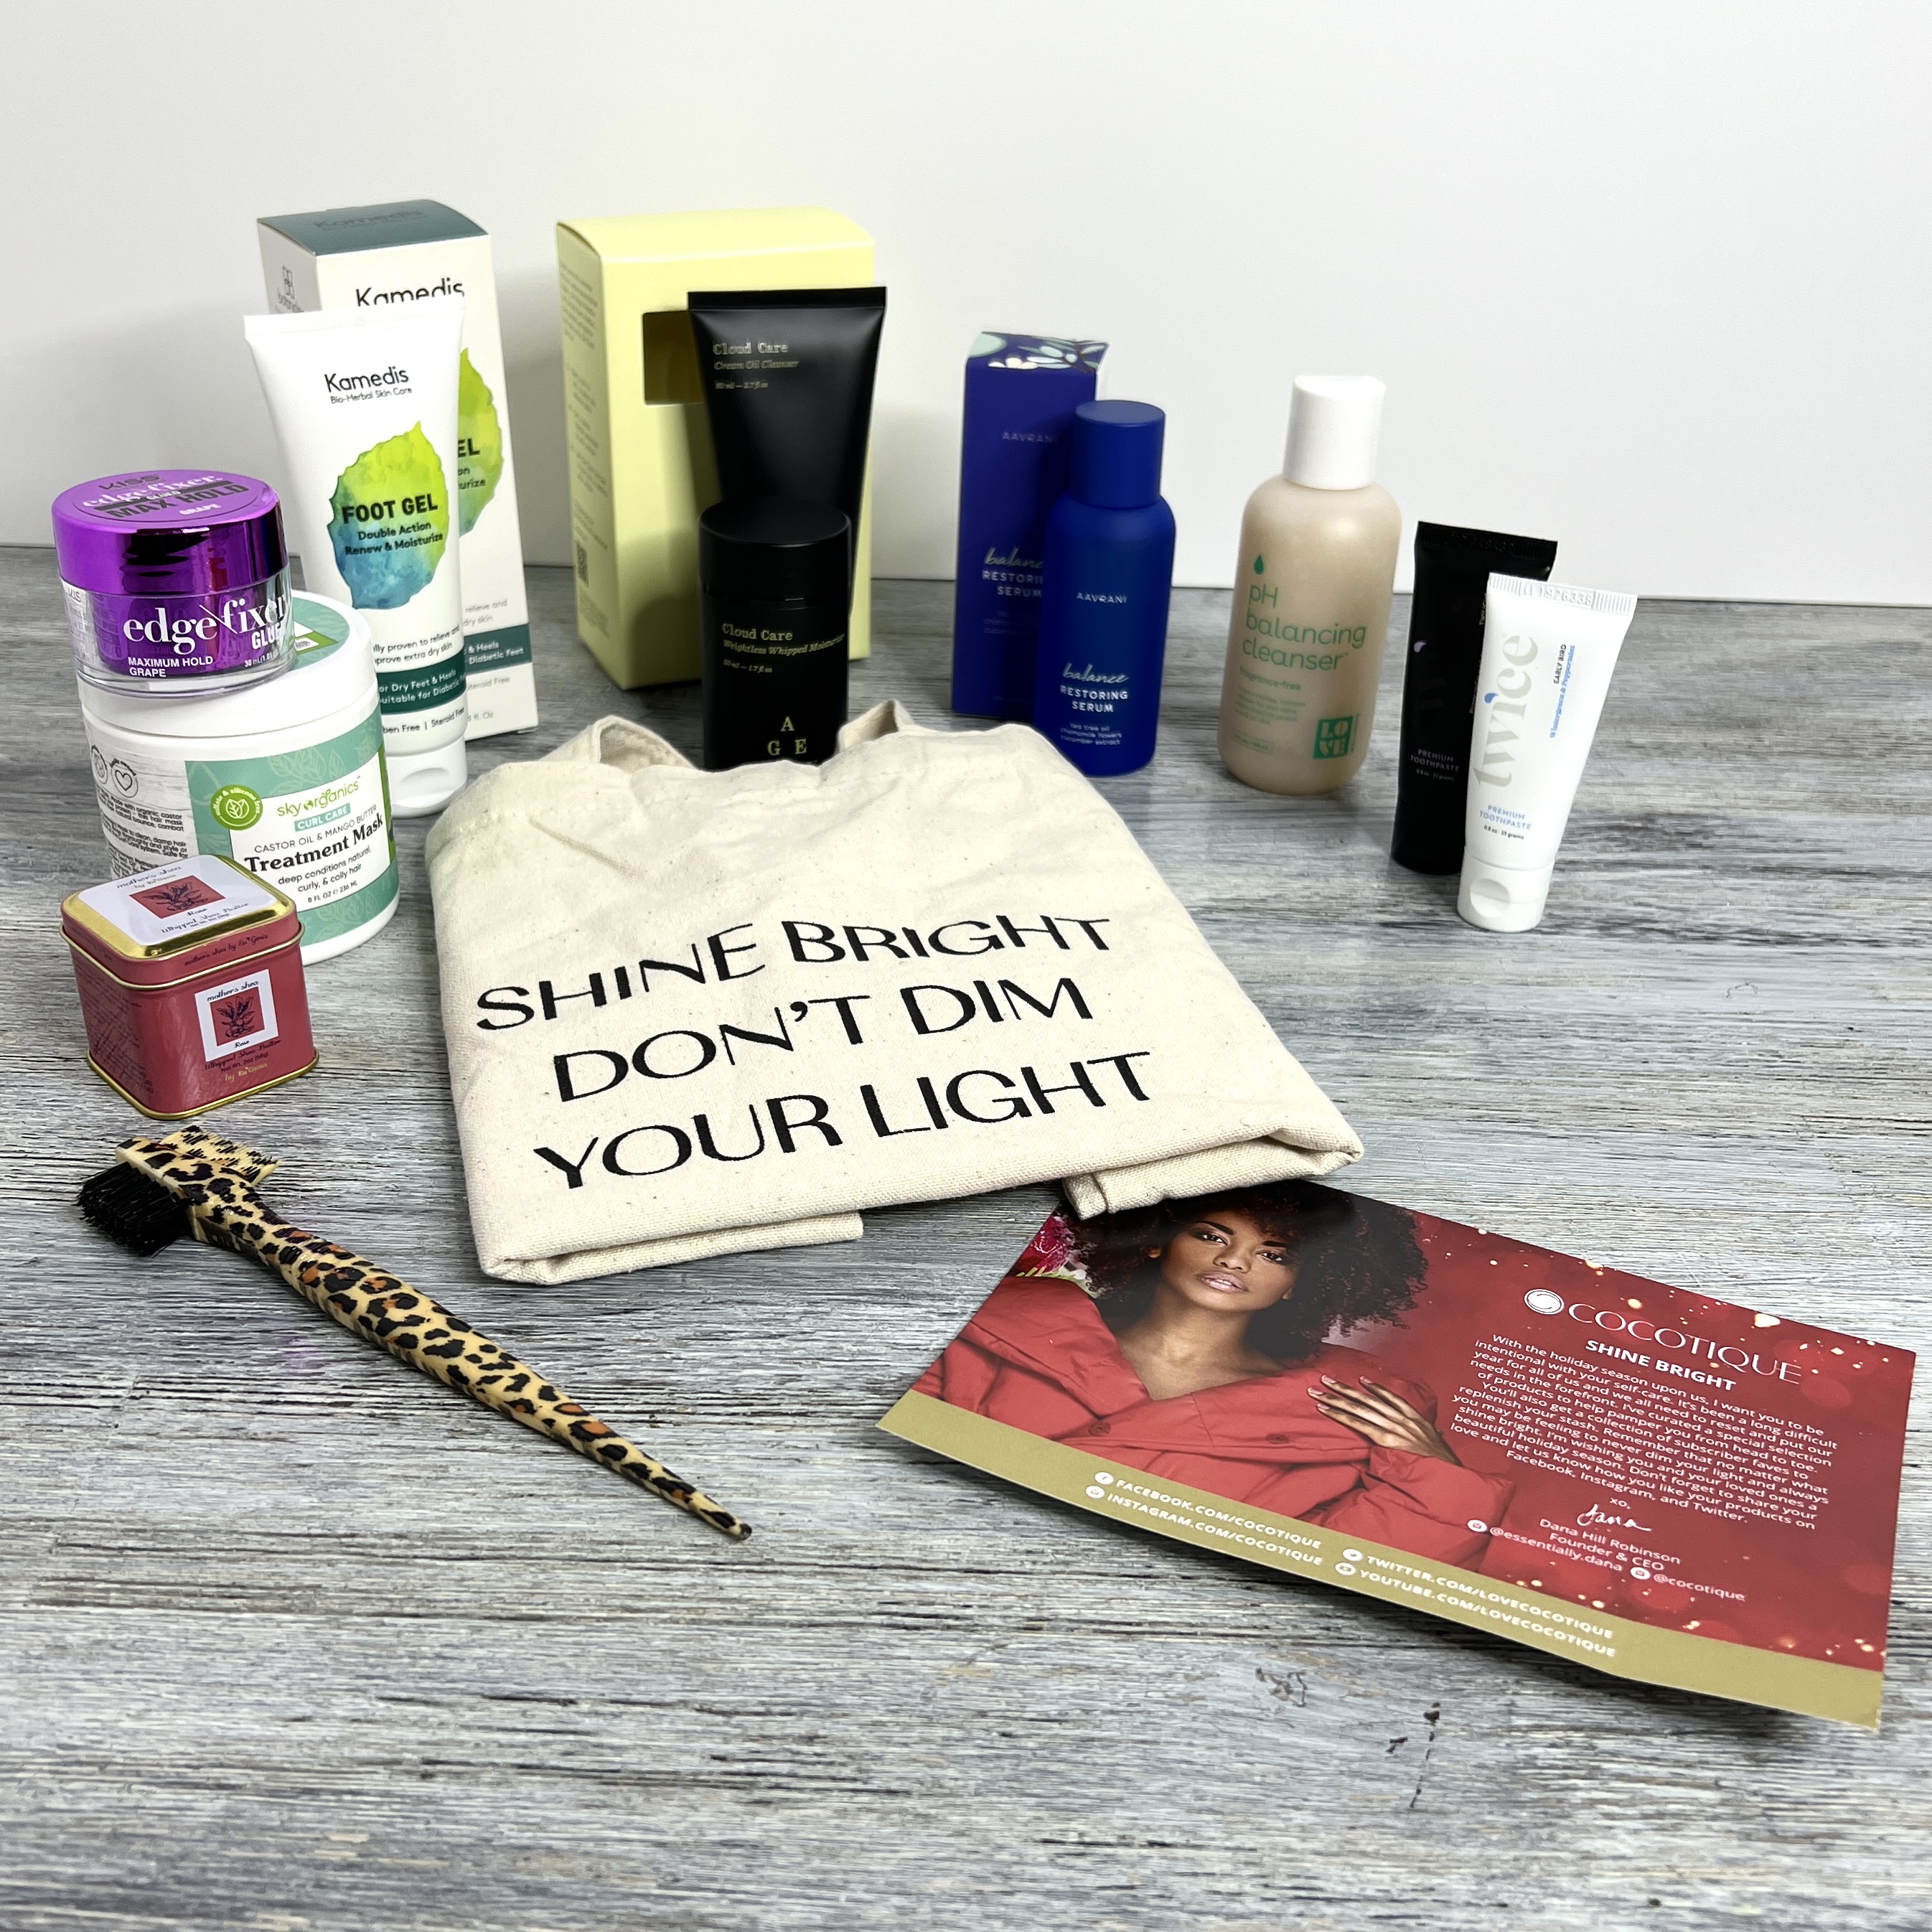  COCOTIQUE - Beauty & Self-Care Subscription Box for Skincare,  Body Care, and Curly/Textured Hair Care : Everything Else